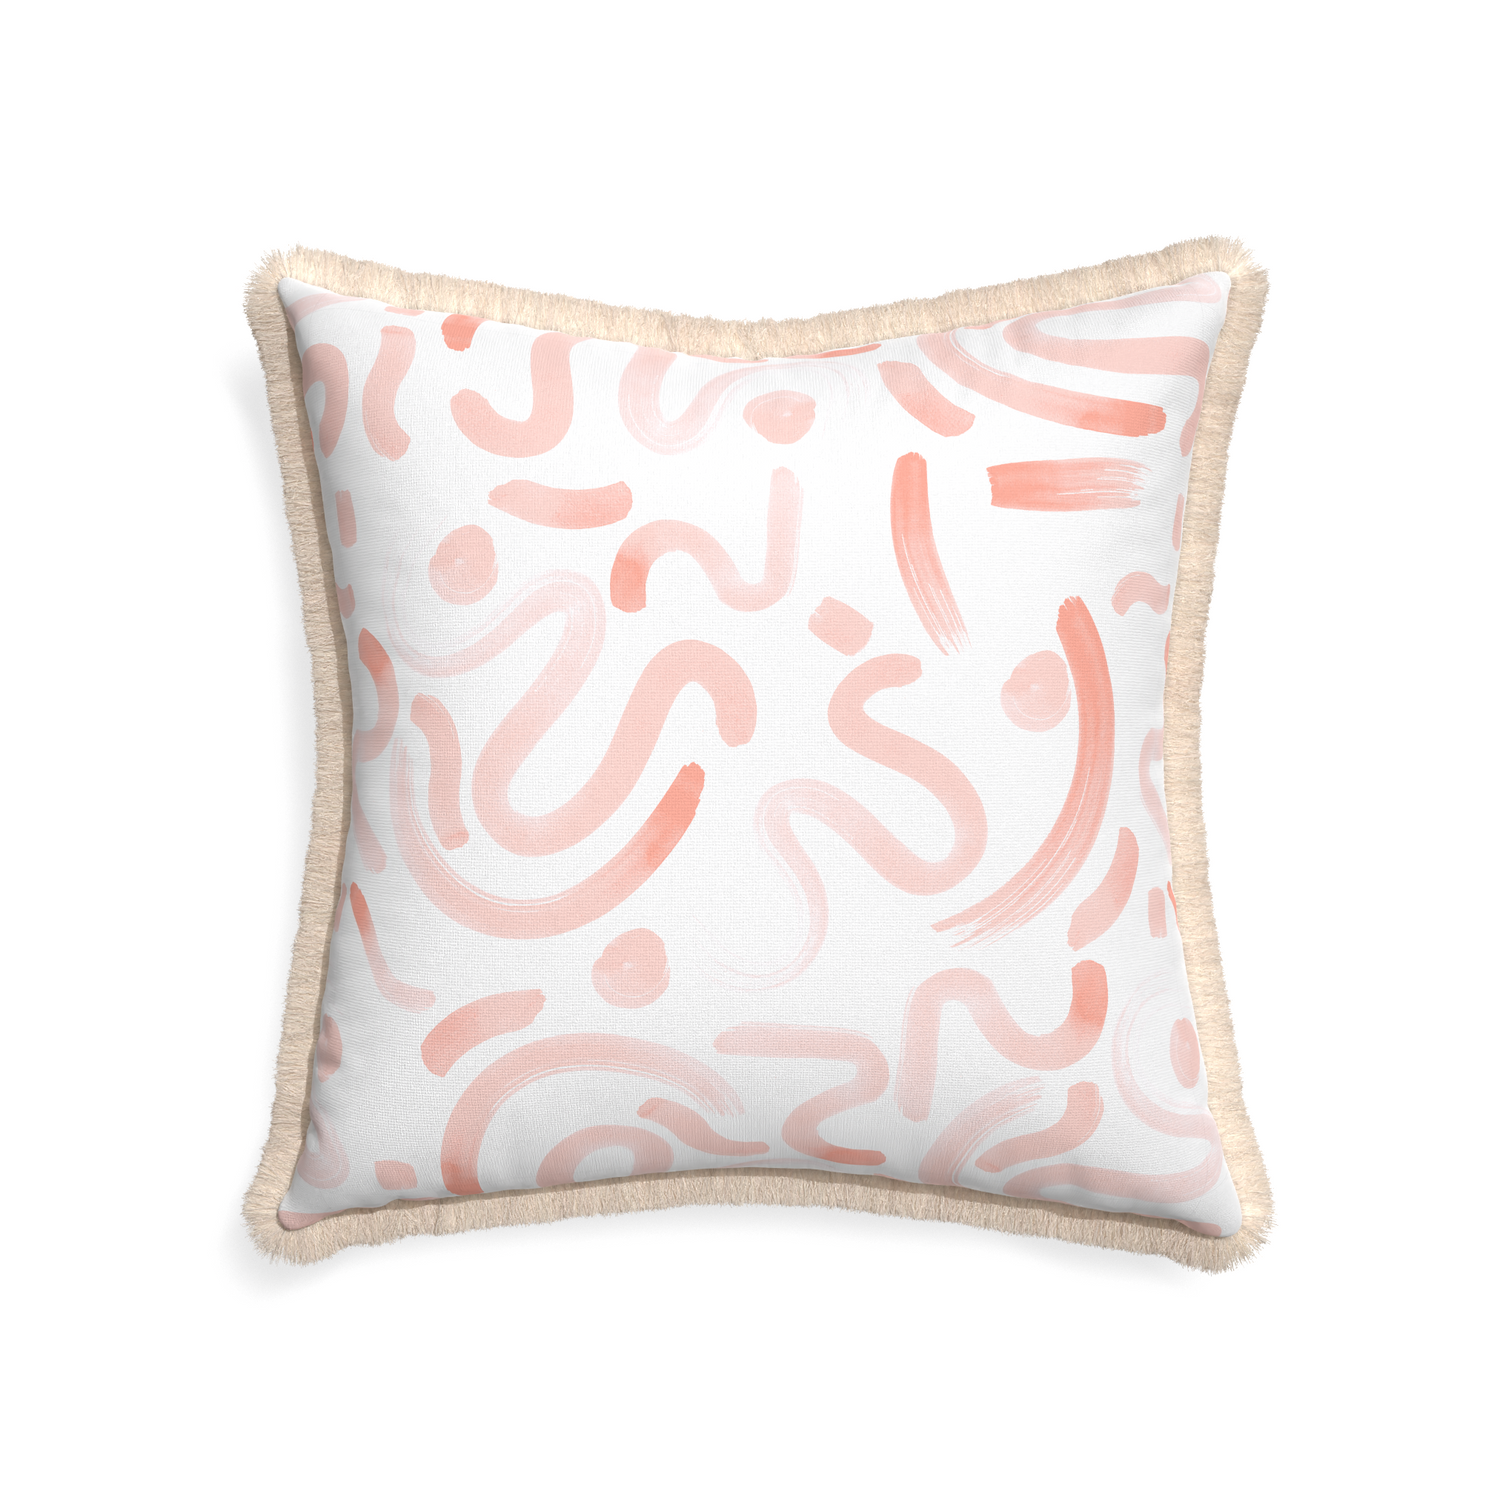 22-square hockney pink custom pink graphicpillow with cream fringe on white background